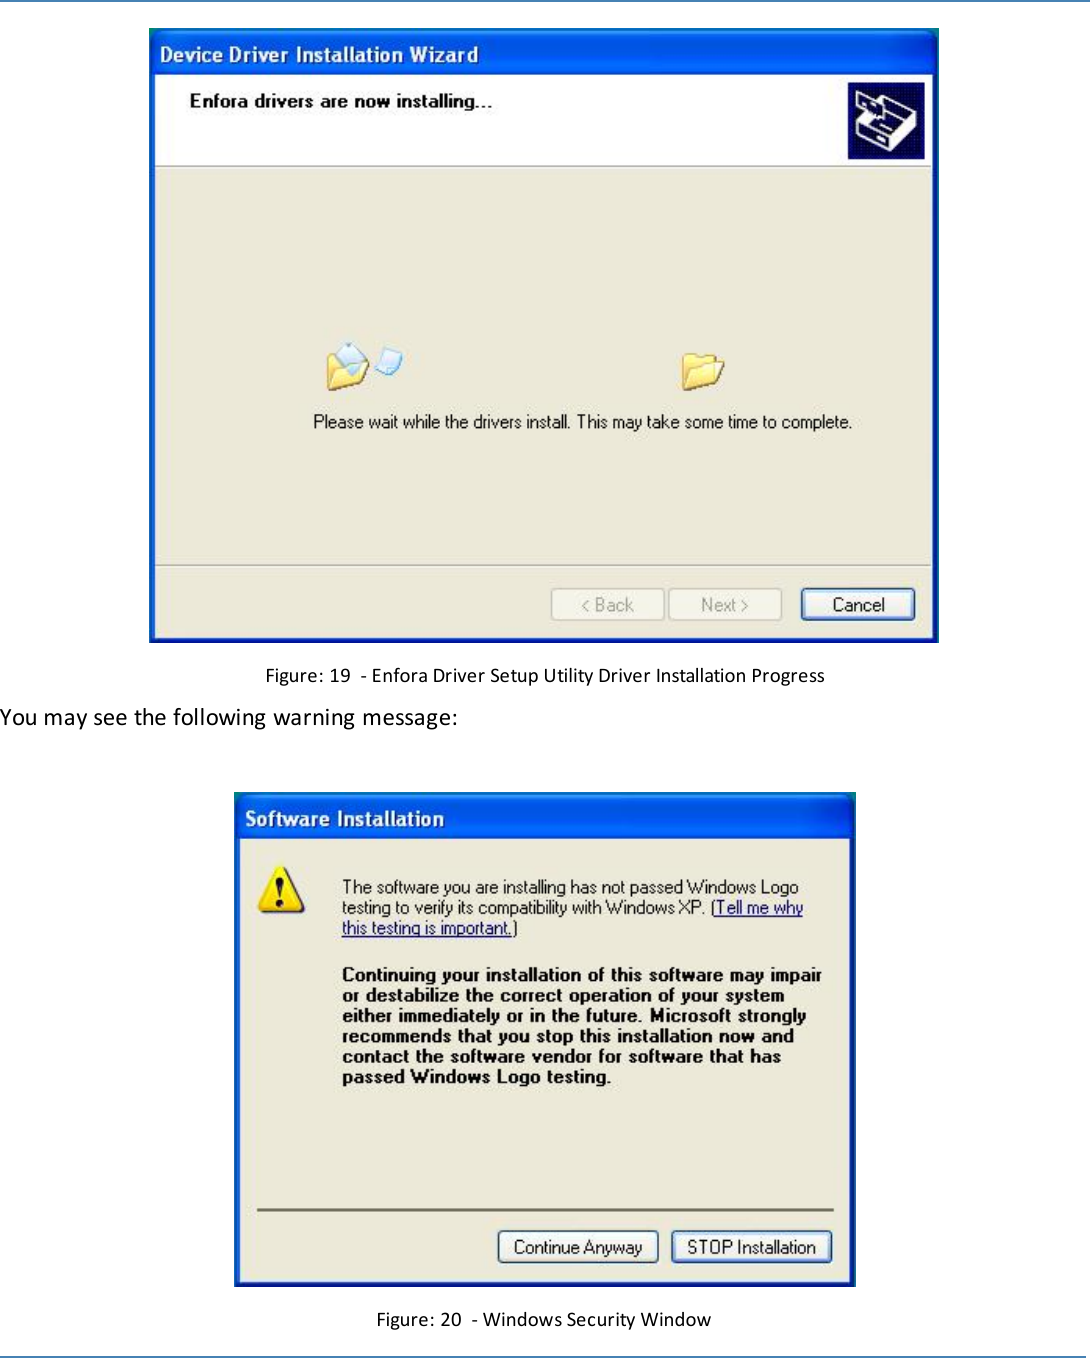 25Figure: 19 - Enfora Driver Setup Utility Driver Installation ProgressYou may see the following warning message:Figure: 20 - Windows Security Window